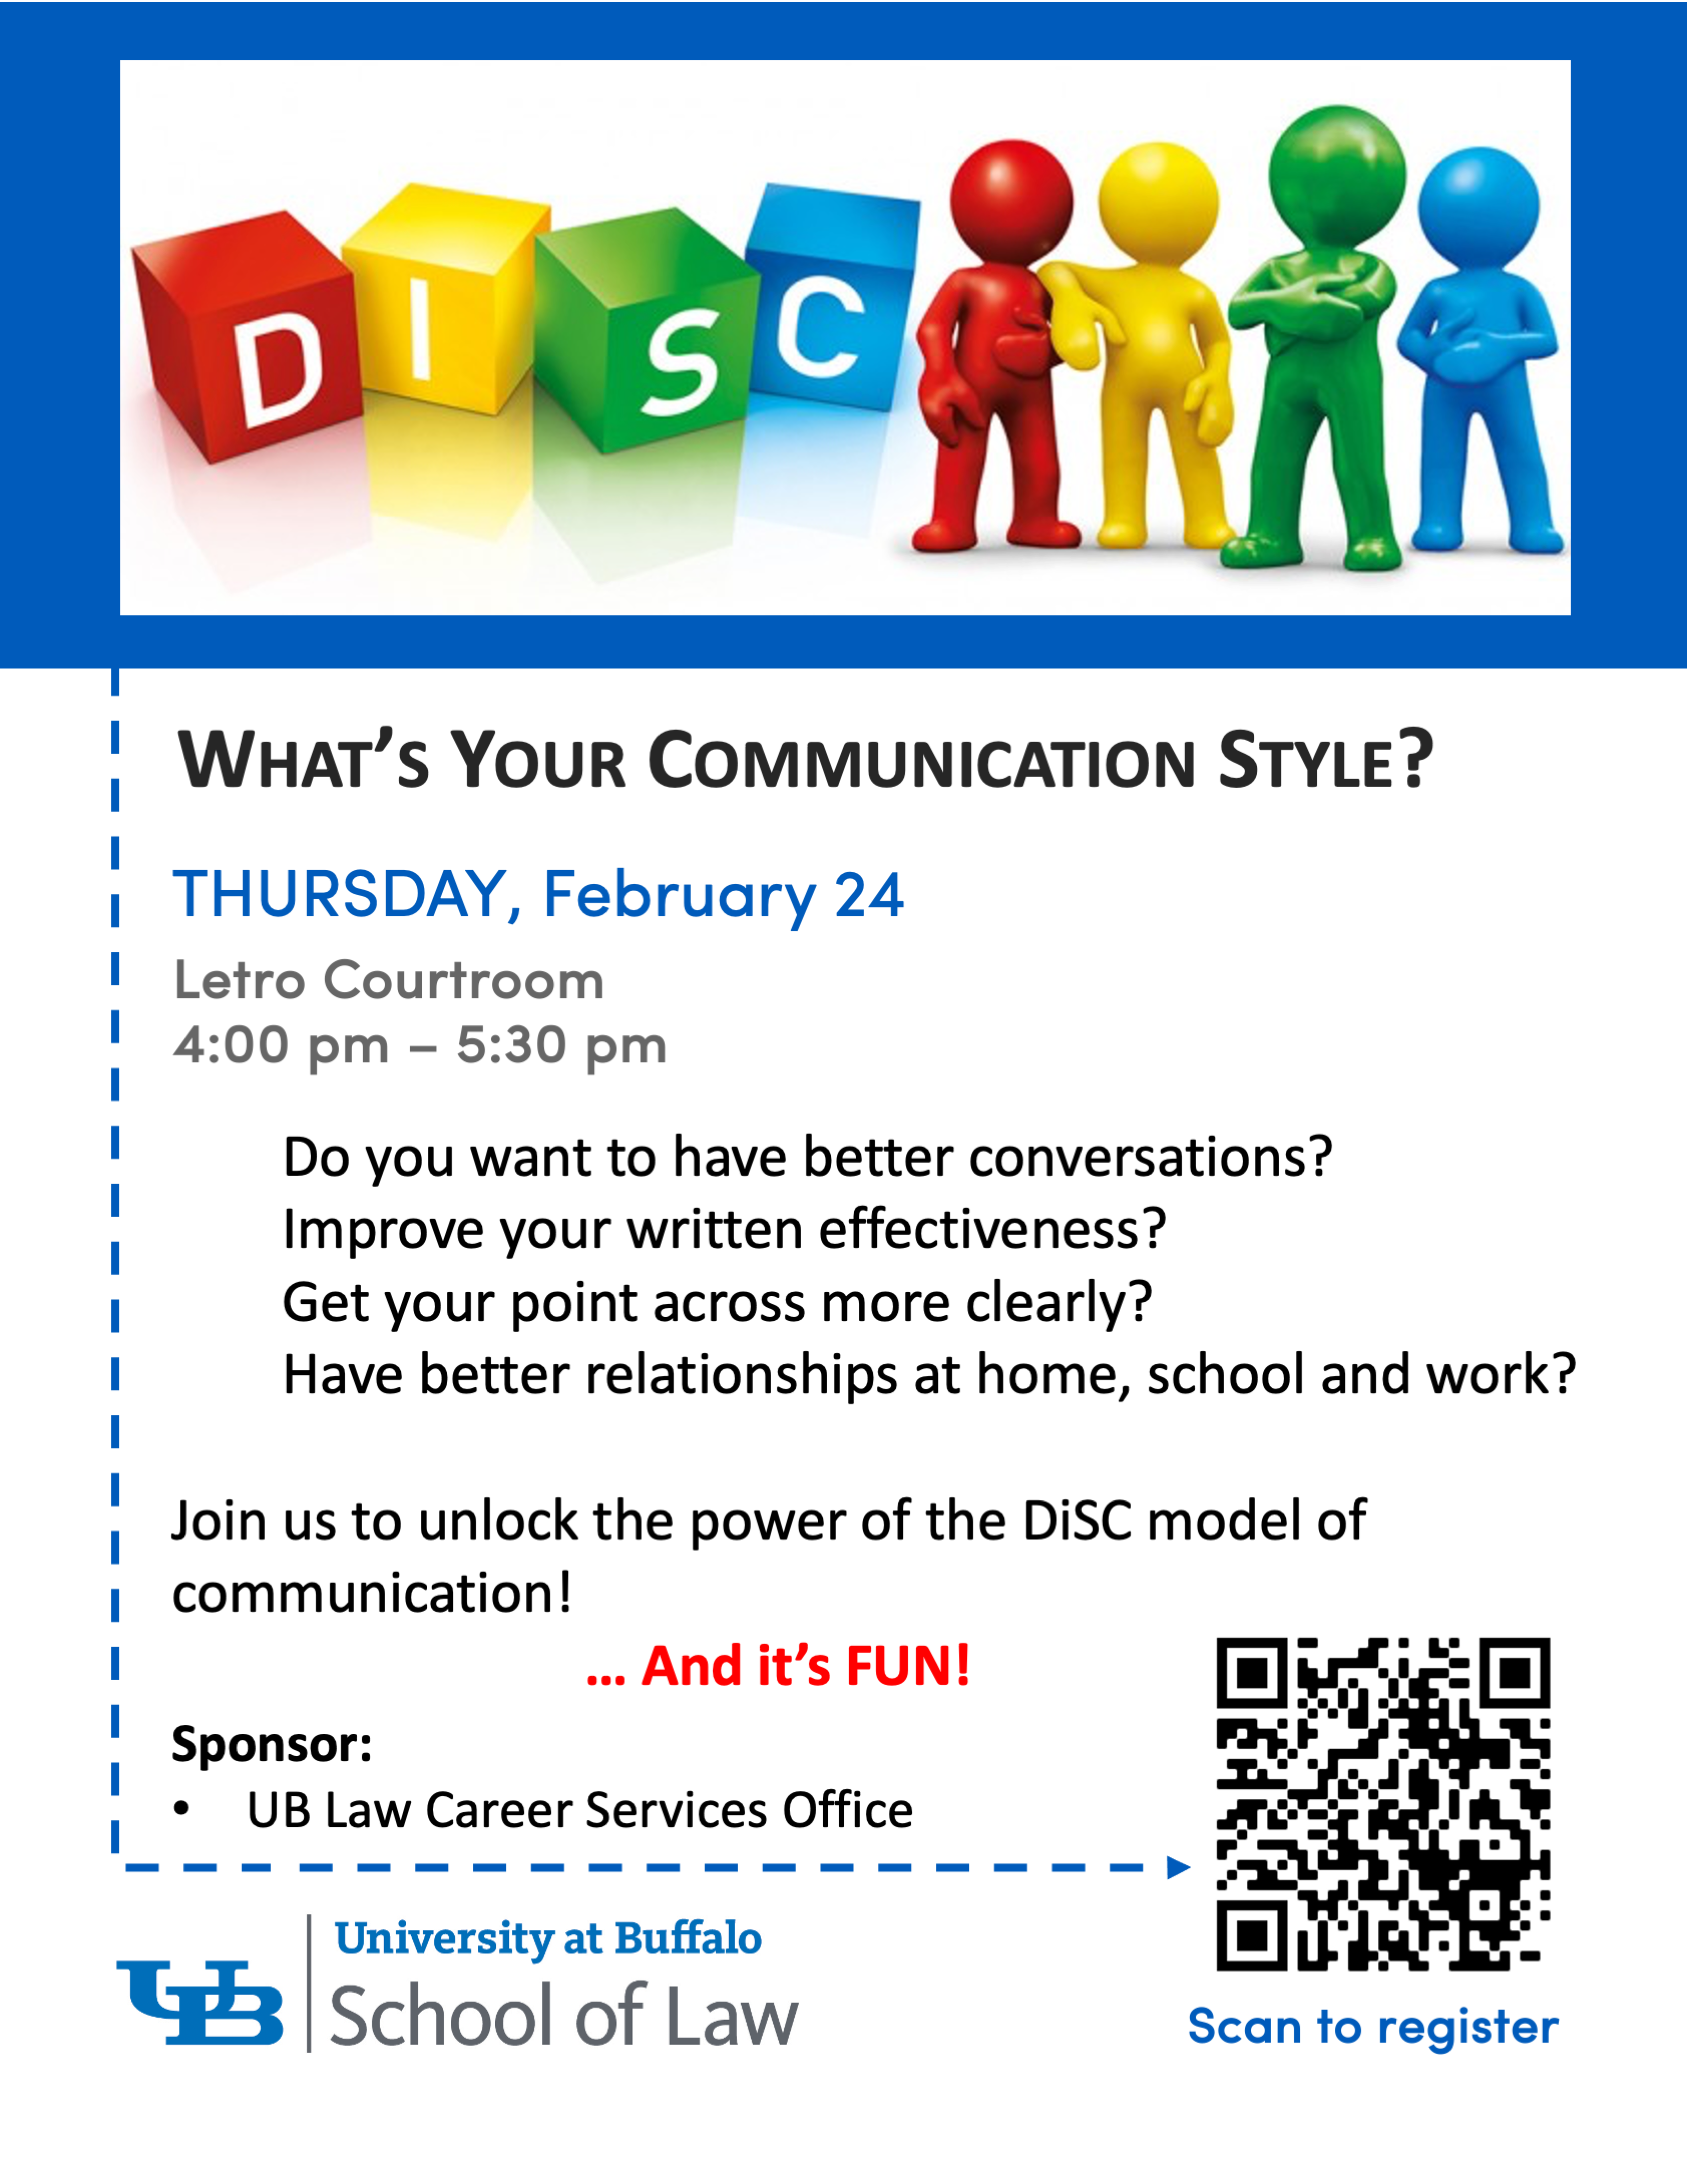 Ub Calendar Fall 2022 Ub Events Calendar - 12 Weeks Of Wellness For Spring 2022: Self-Awareness -  Disc: What's Your Communication Style?